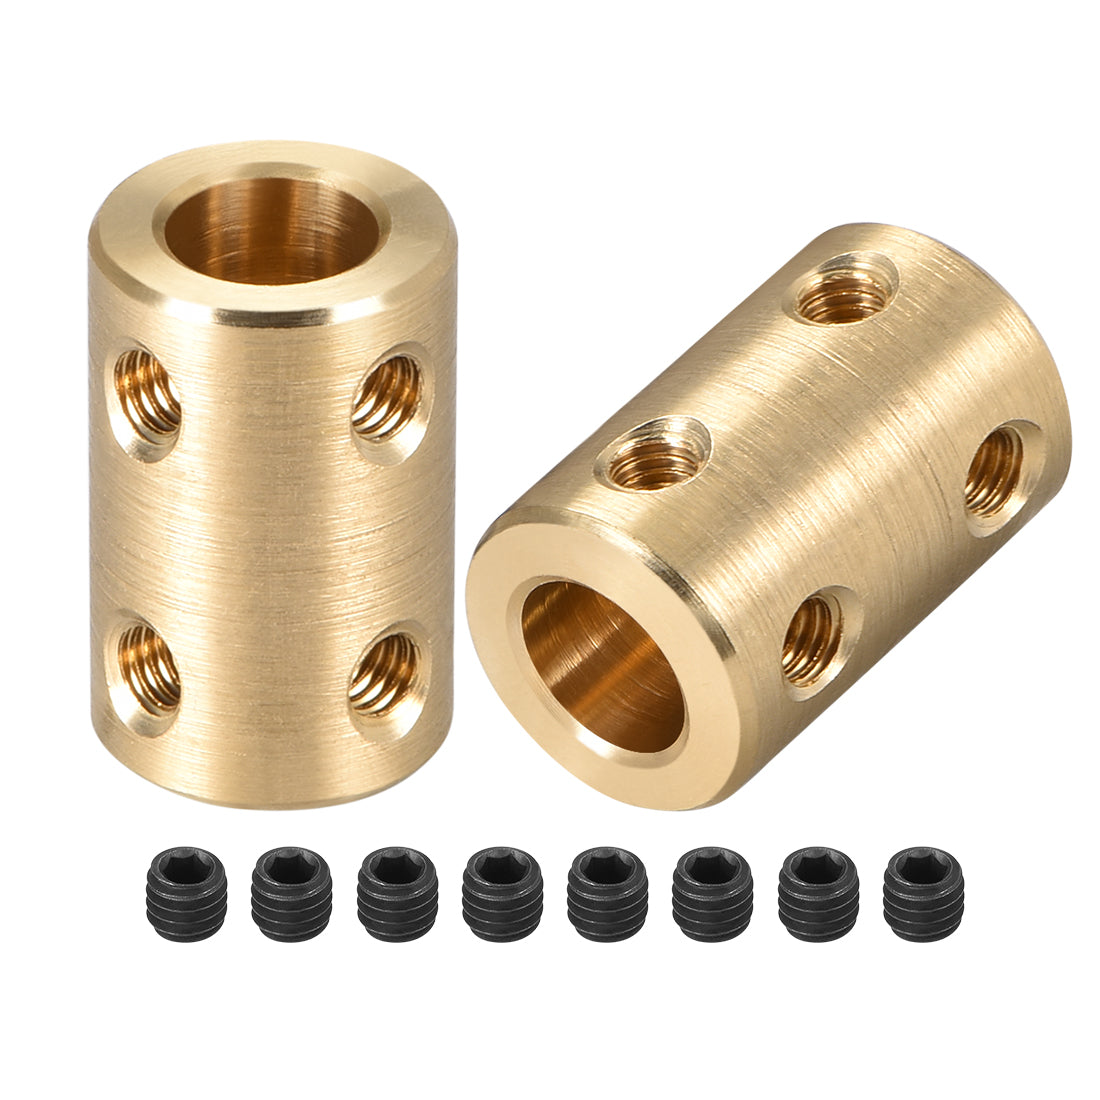 uxcell Uxcell Shaft Coupling 8mm to 8mm Bore L22xD14 Robot Motor Wheel Rigid  Connector Gold Tone 2 Pcs